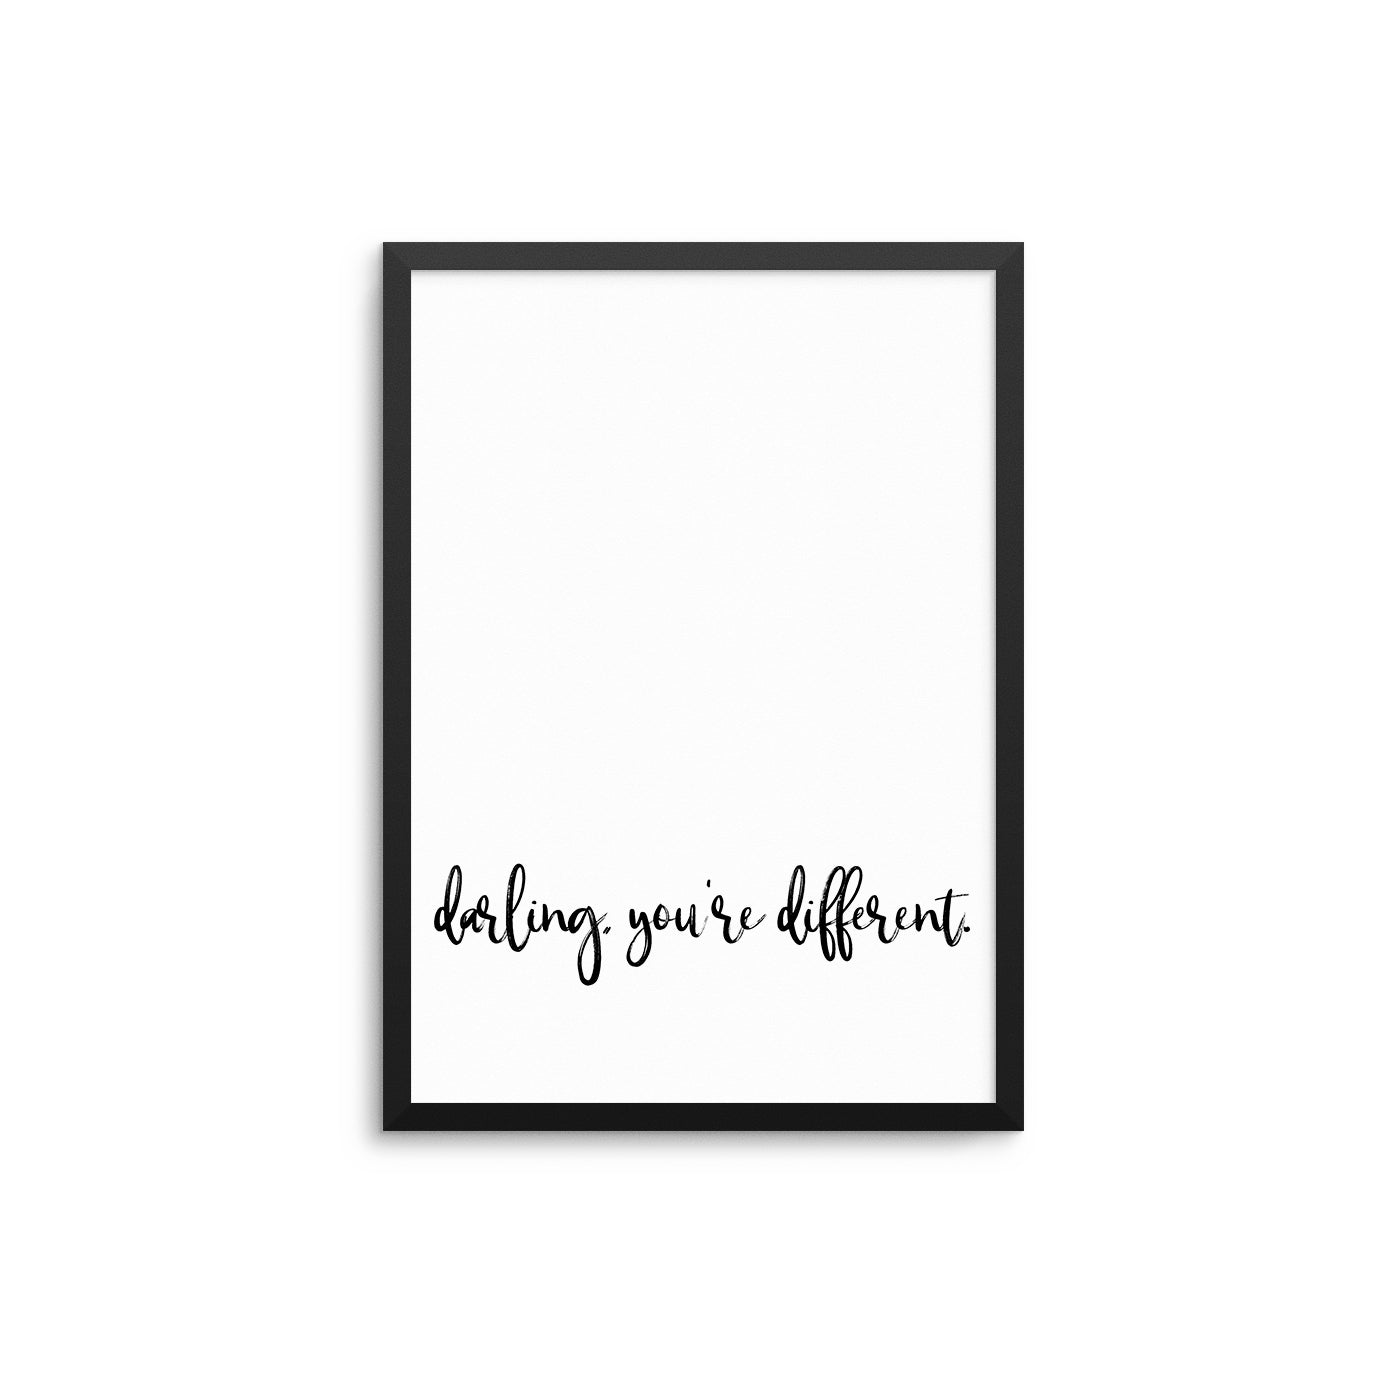 Darling, You're Different - D'Luxe Prints